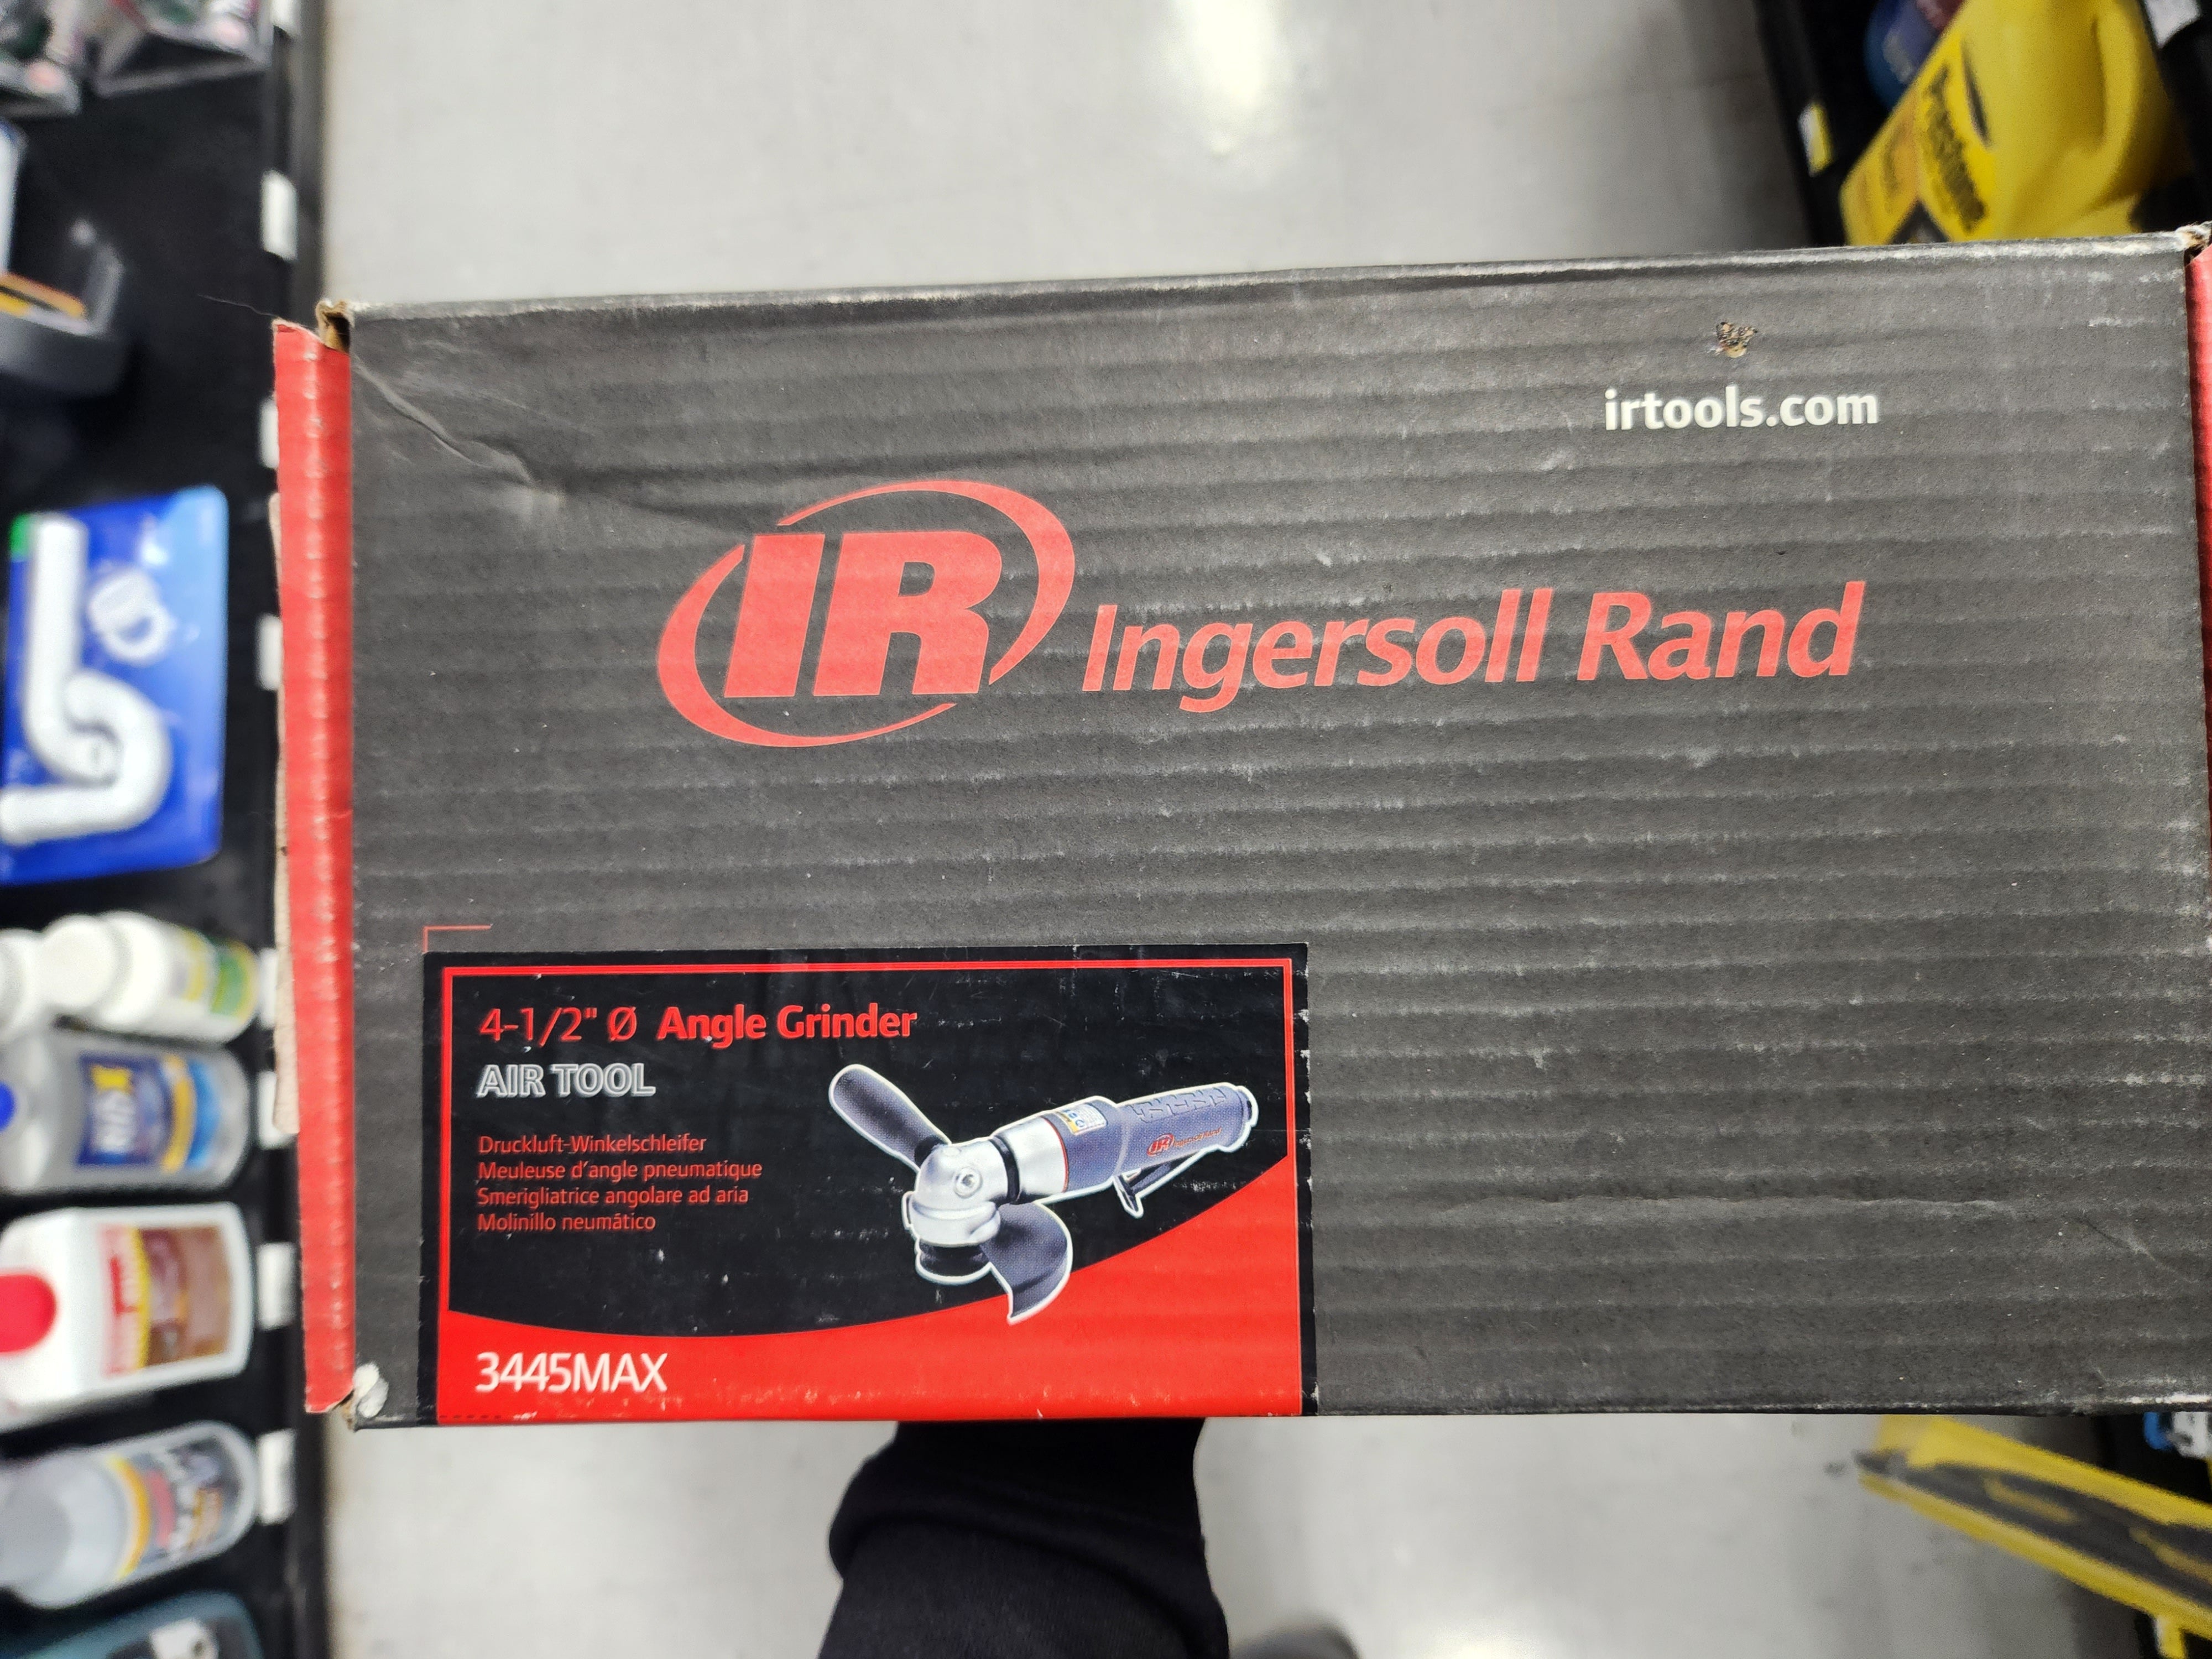 Ingersoll Rand 3445MAX Air Angle Grinder, 4.5" Wheel, 5/8 in.- 11 Thread, 12000 RPM, Rear Exhaust, 0.88 HP, Gray